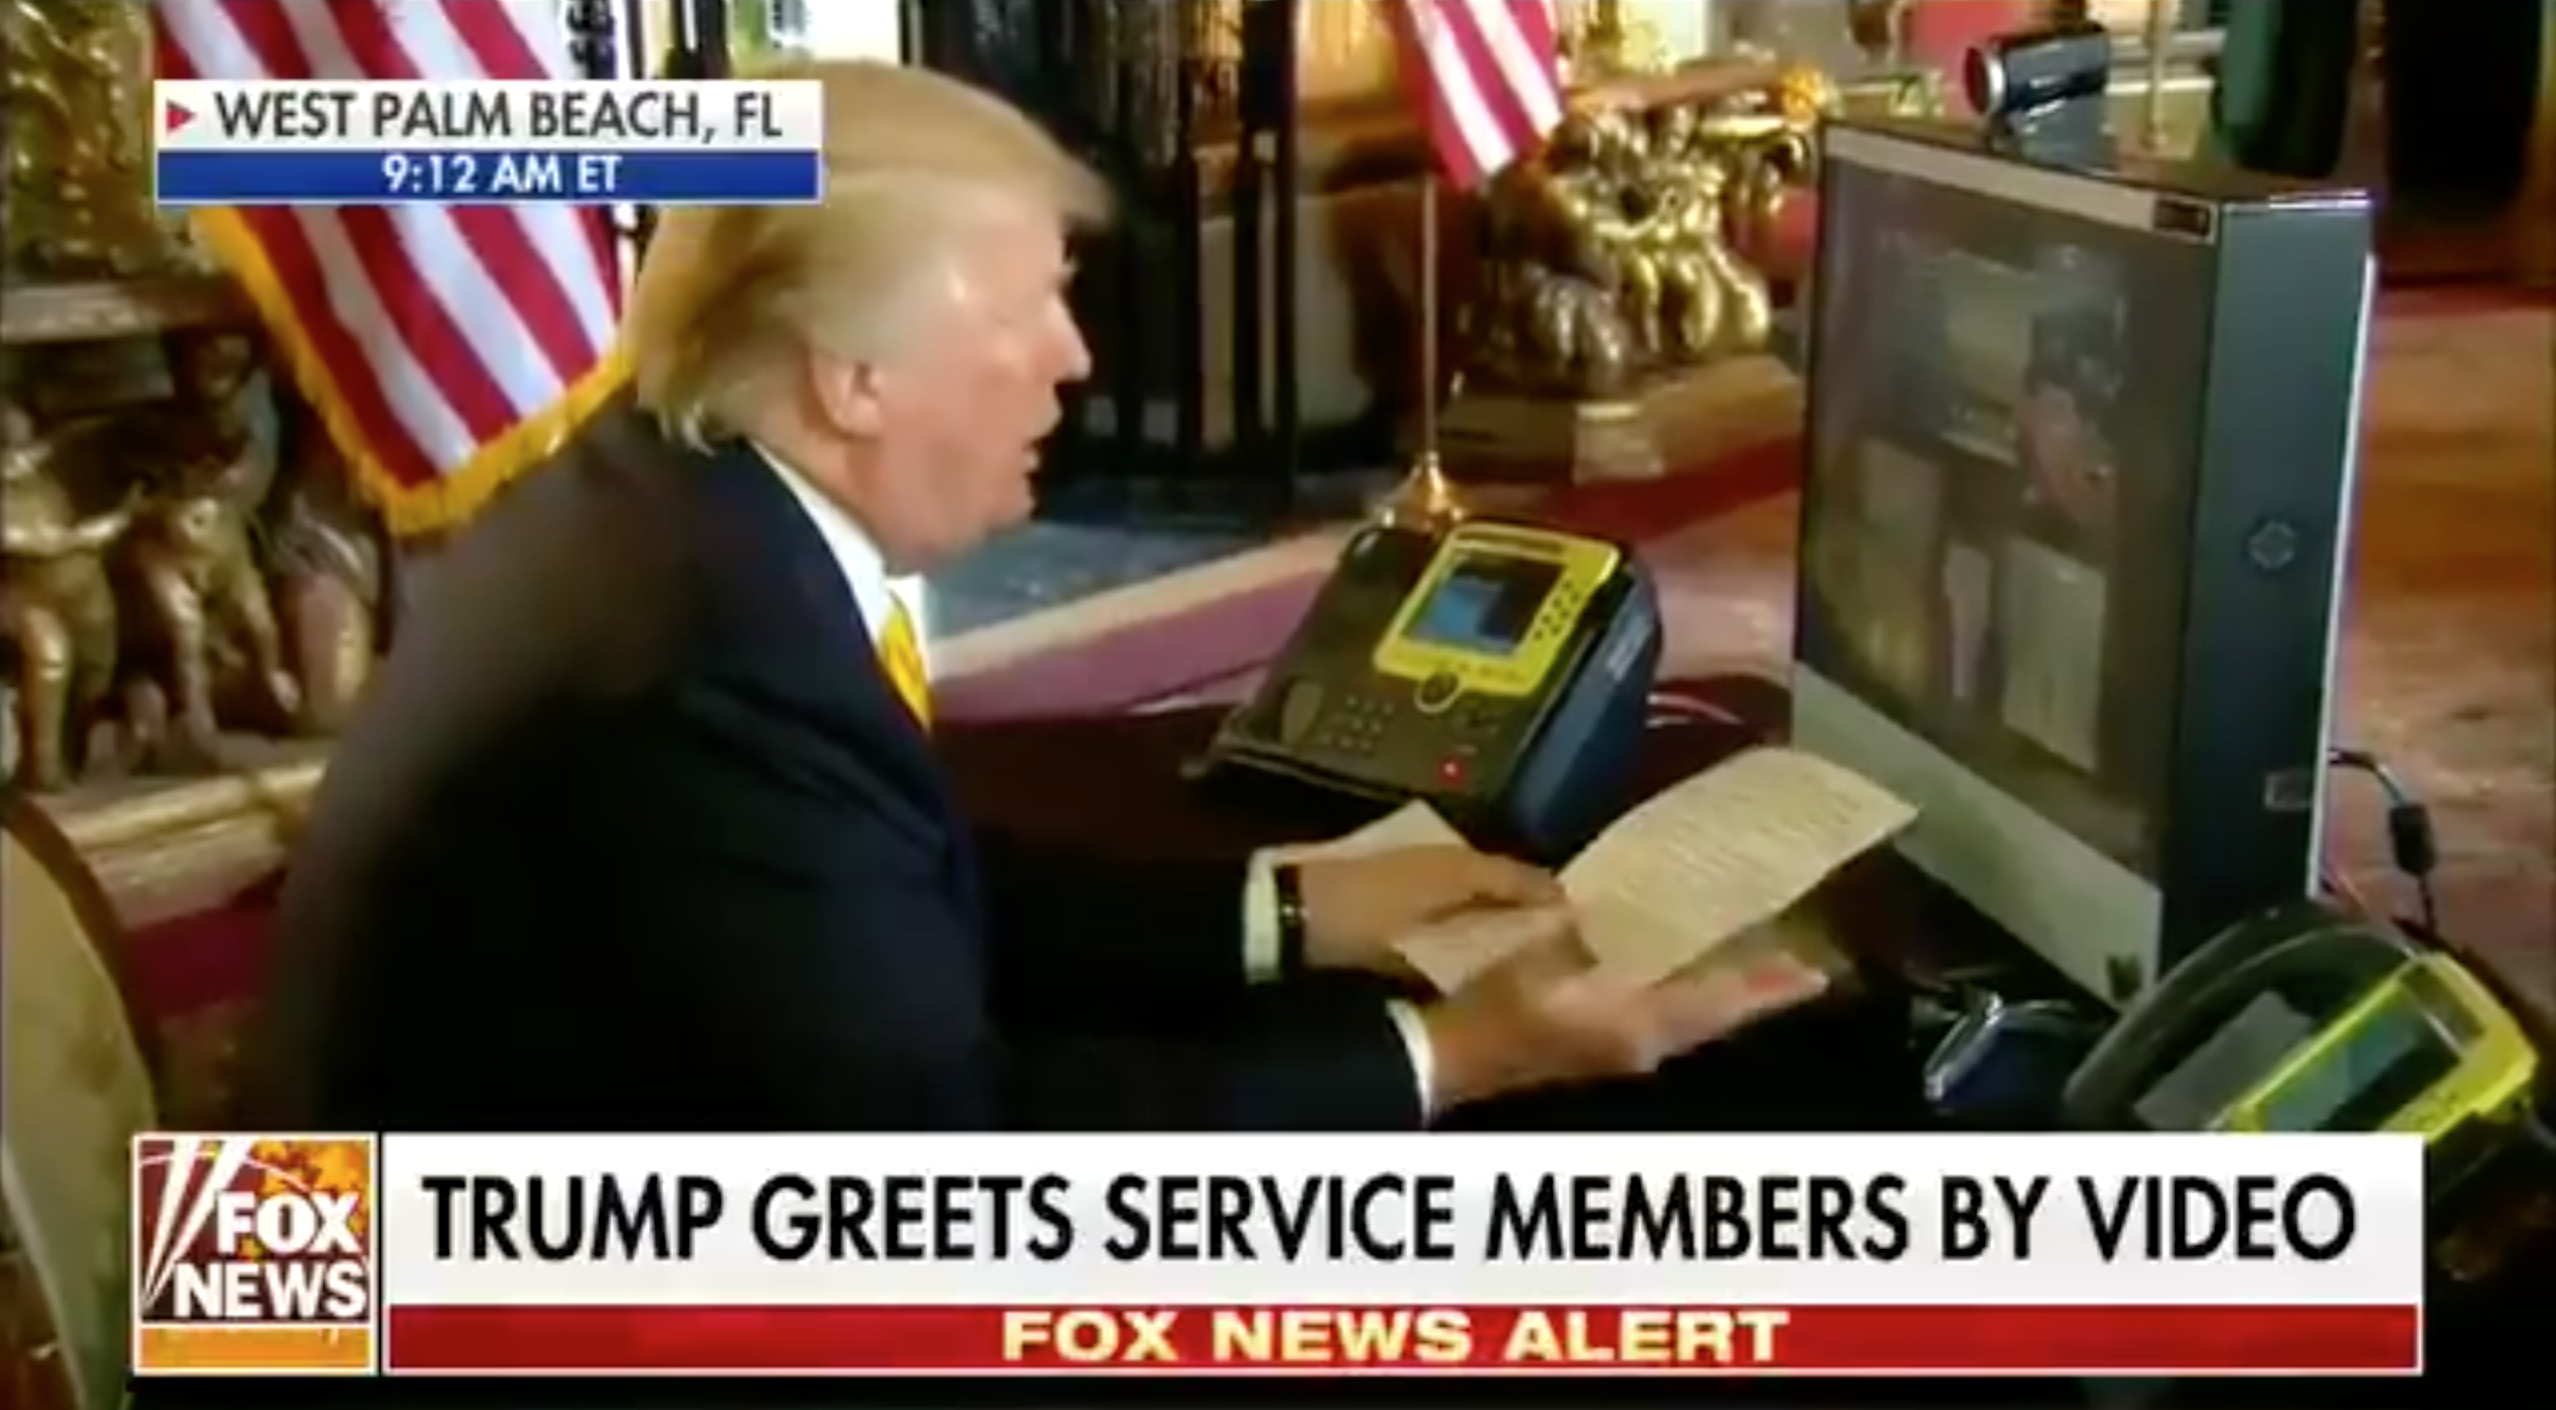 President Trump on video chat.